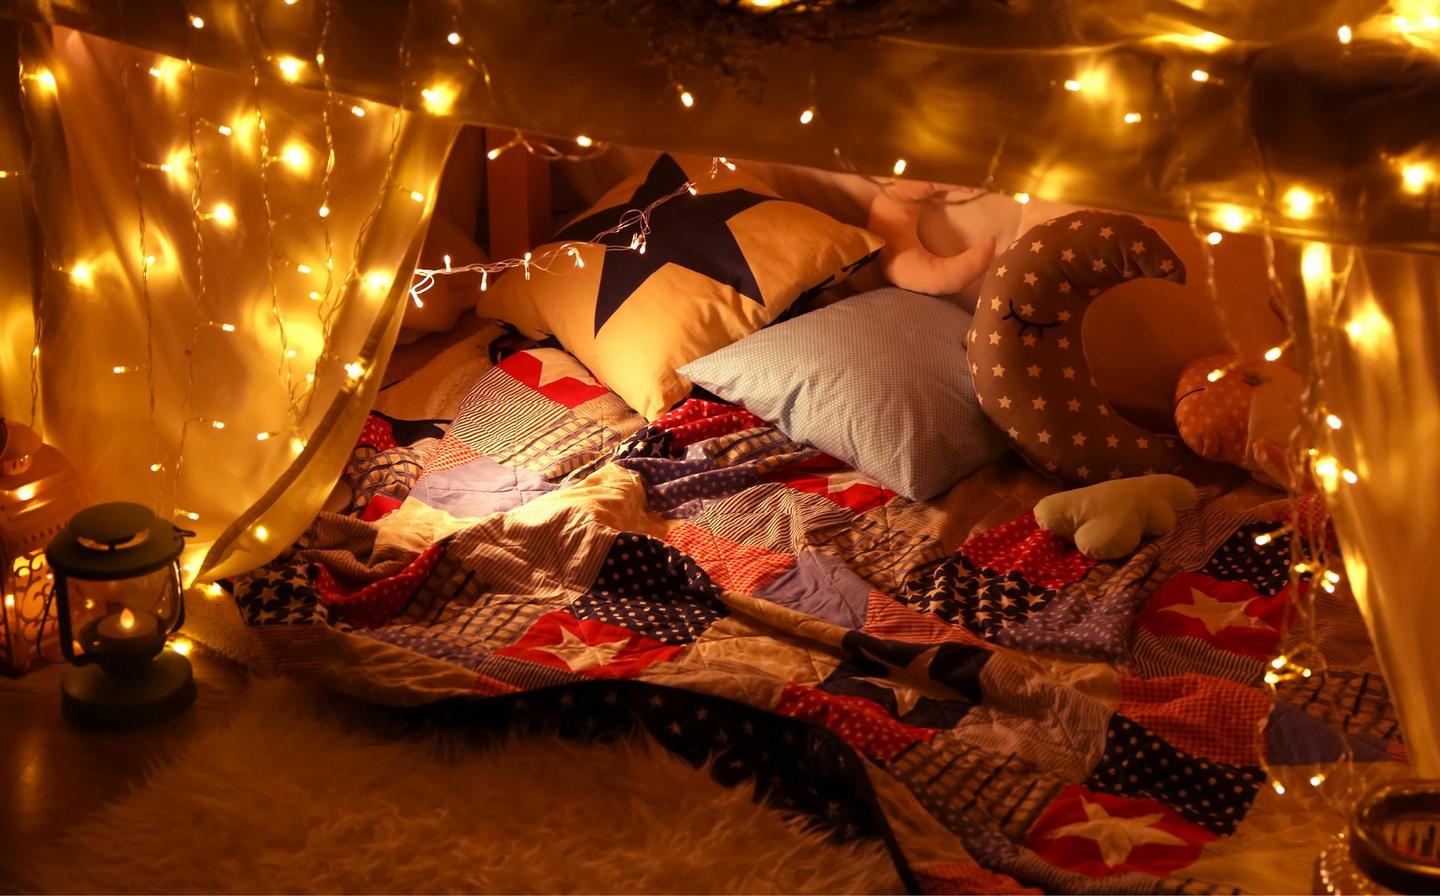 An indoor fort filled with blankets cushions and fairy lights